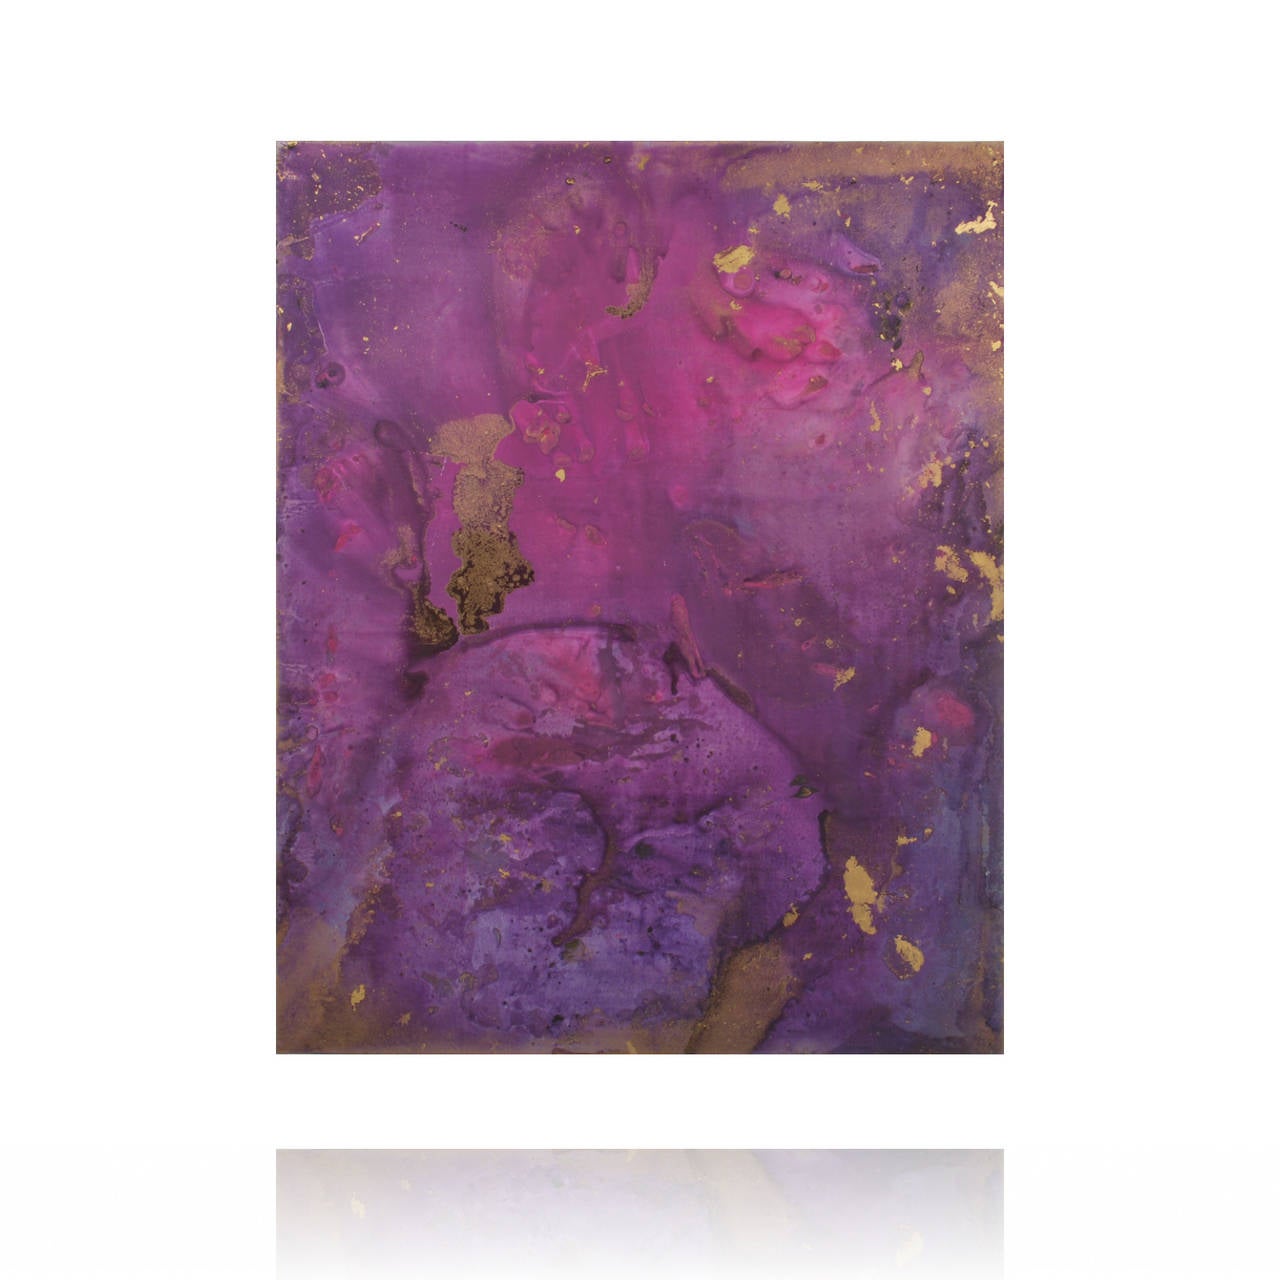 Layered with shades of amethyst, lavender and plum, the clouds of purple tone colors fill this large abstract painting. The flurry of colors are laced with metallic bronze golds tones, which stir the imagination and the eye of the viewer. This